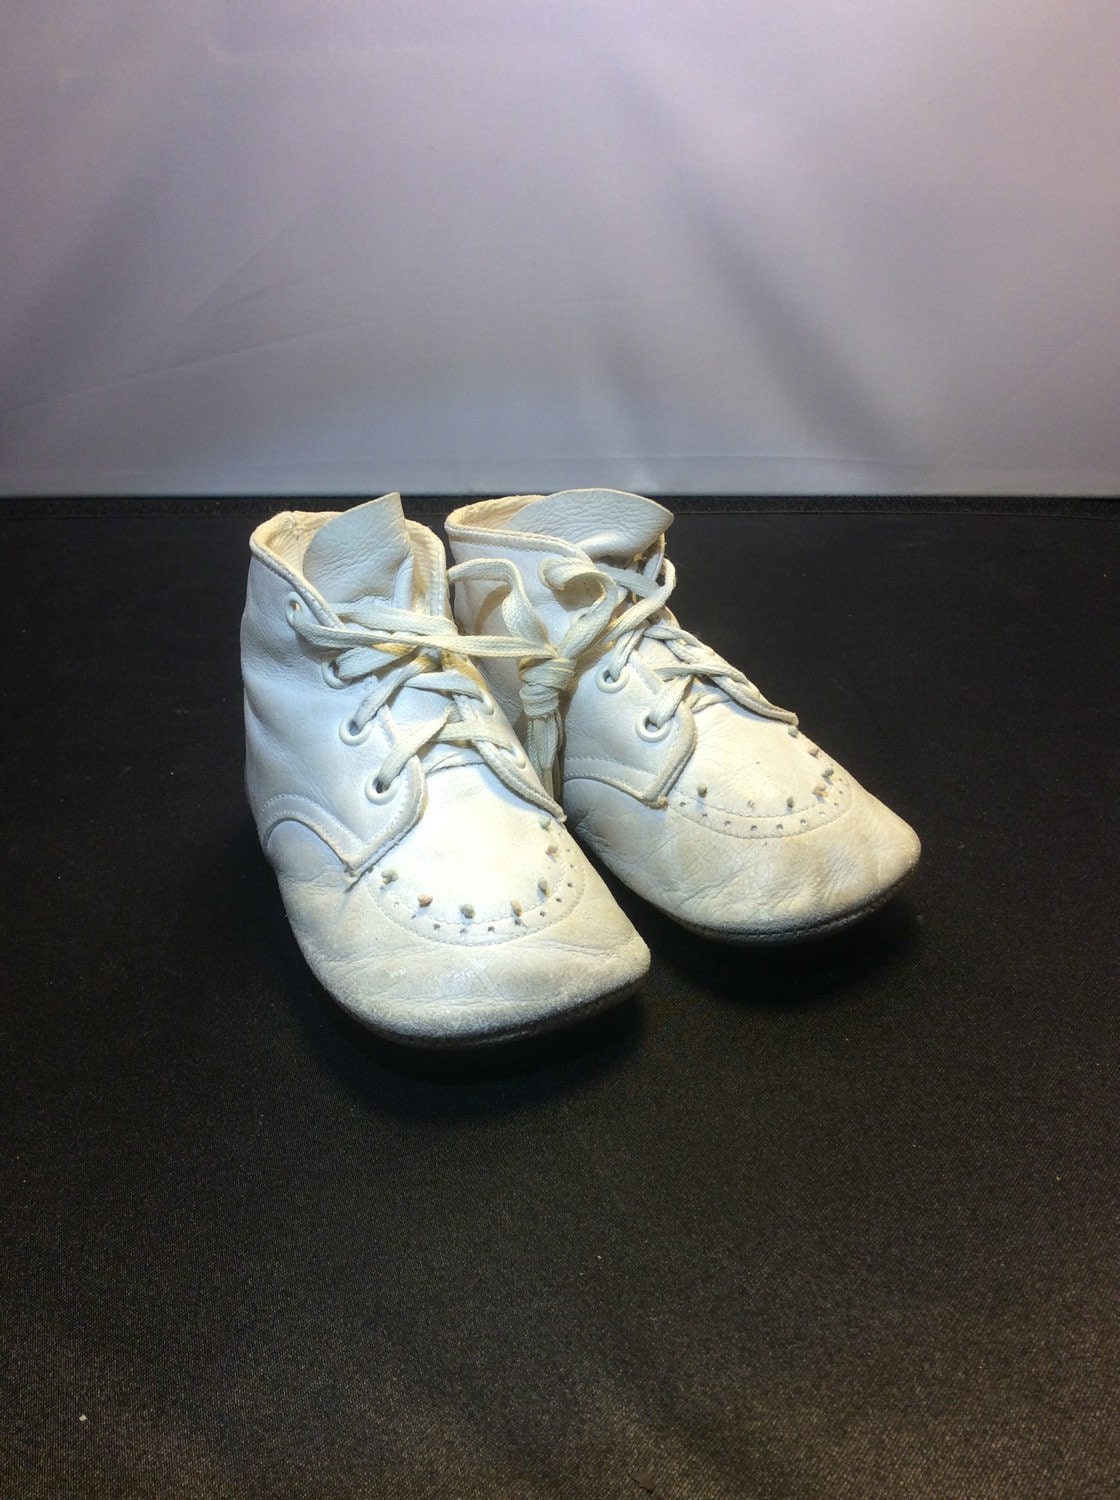 Vintage Baby Shoes Baby Leather Shoes Antique by CoolVintageShop